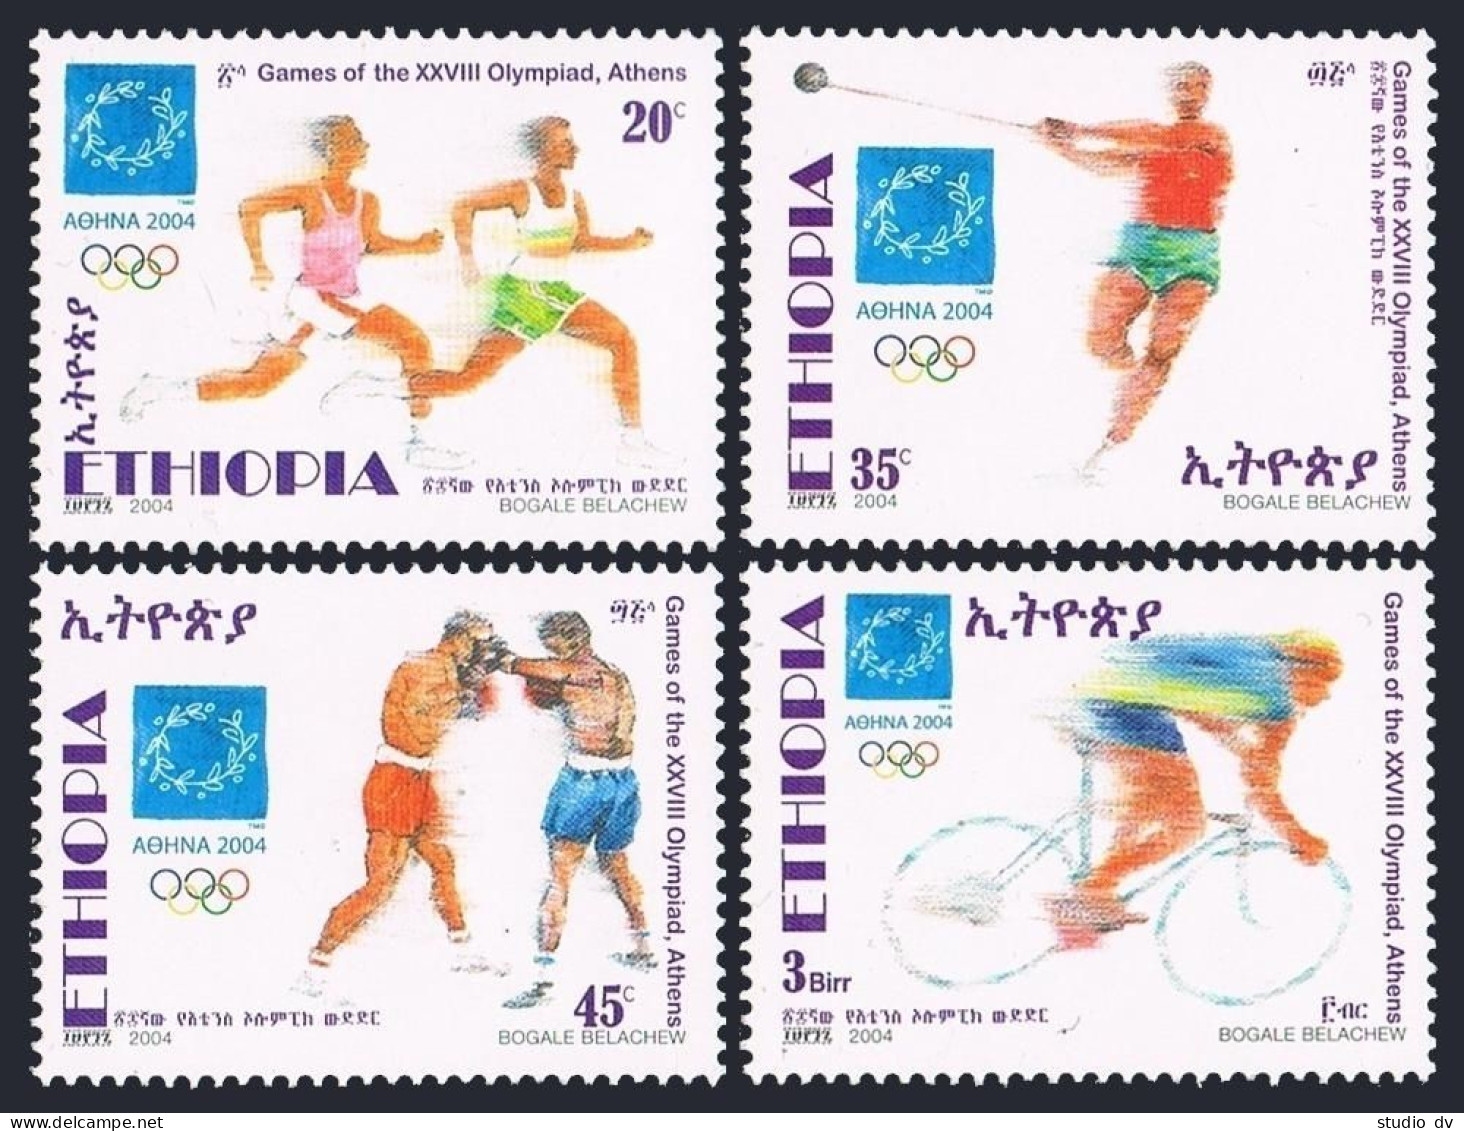 Ethiopia 1674-1677,MNH. Olympics Athens-2004. Track,Hammer Throw,Boxing,Cycling. - Ethiopia